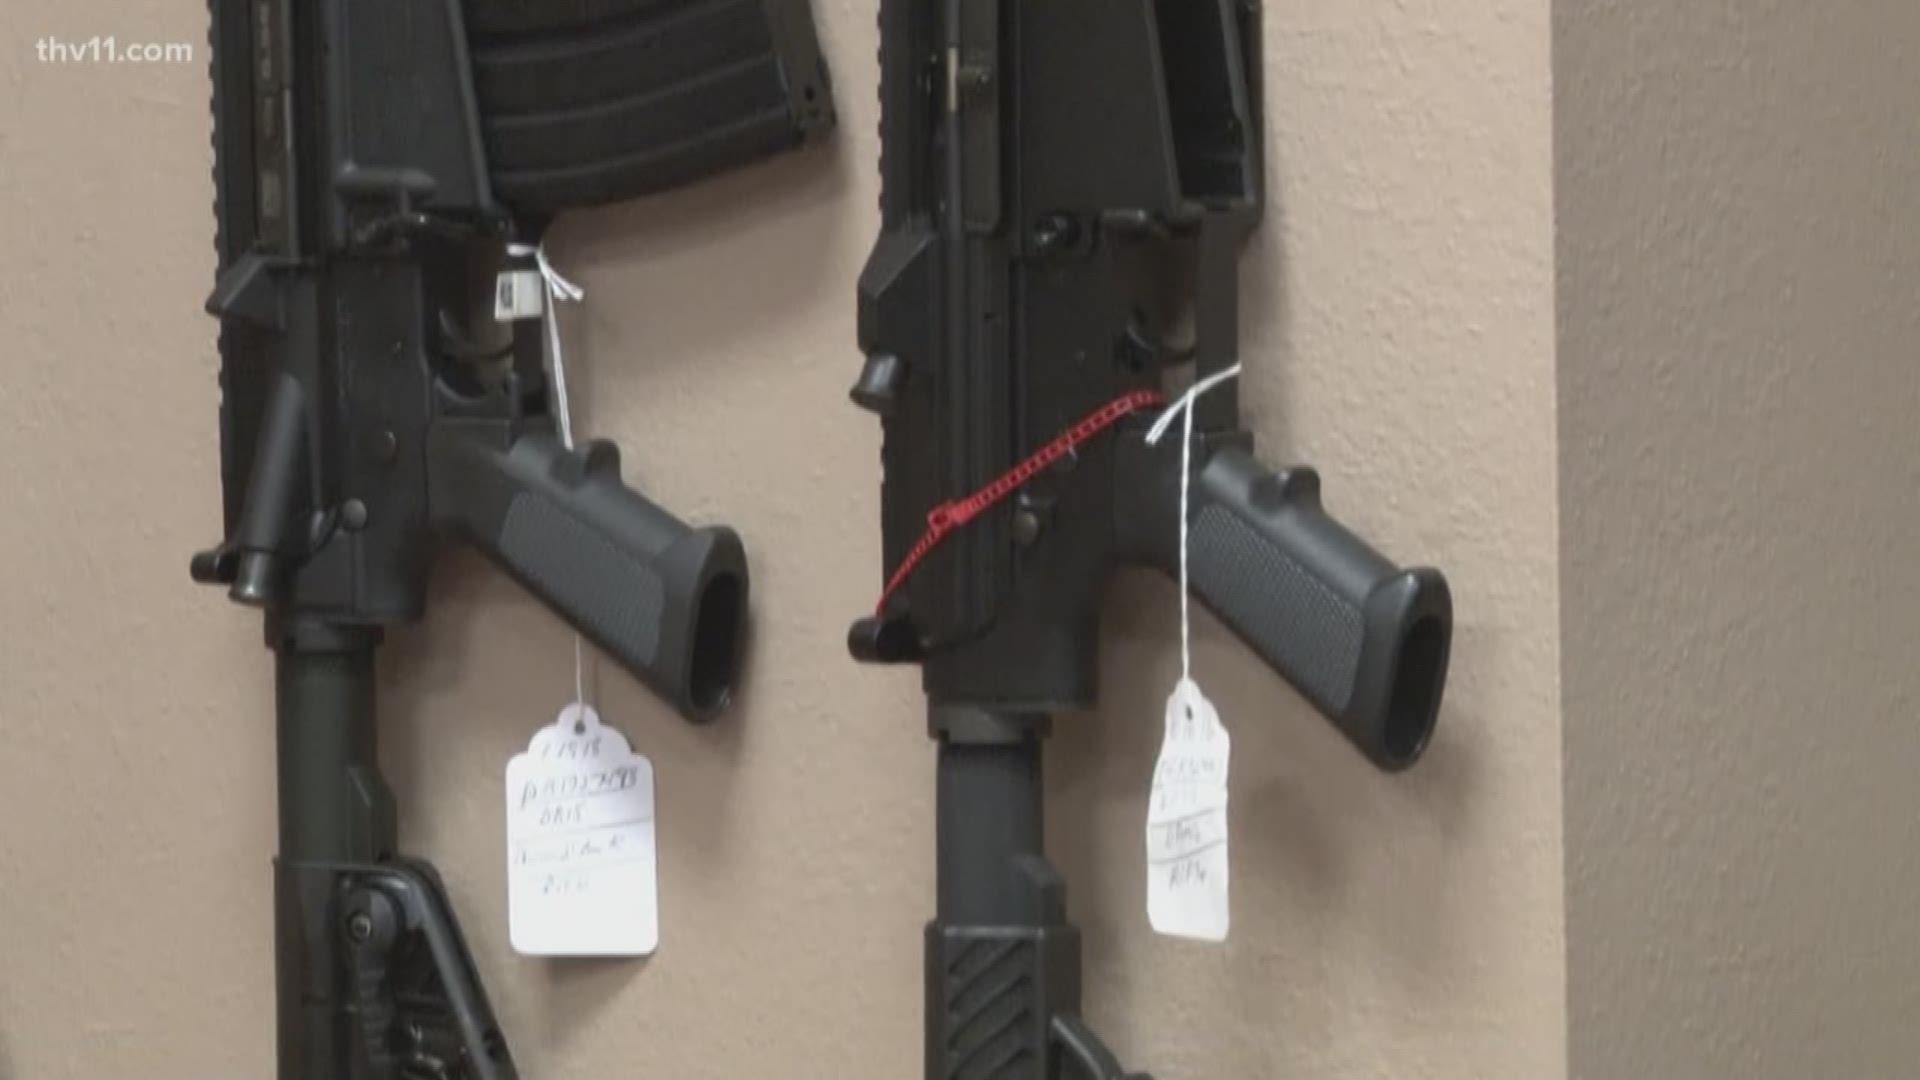 A gun seller said he doesn't think banning bump stocks will do much of anything.